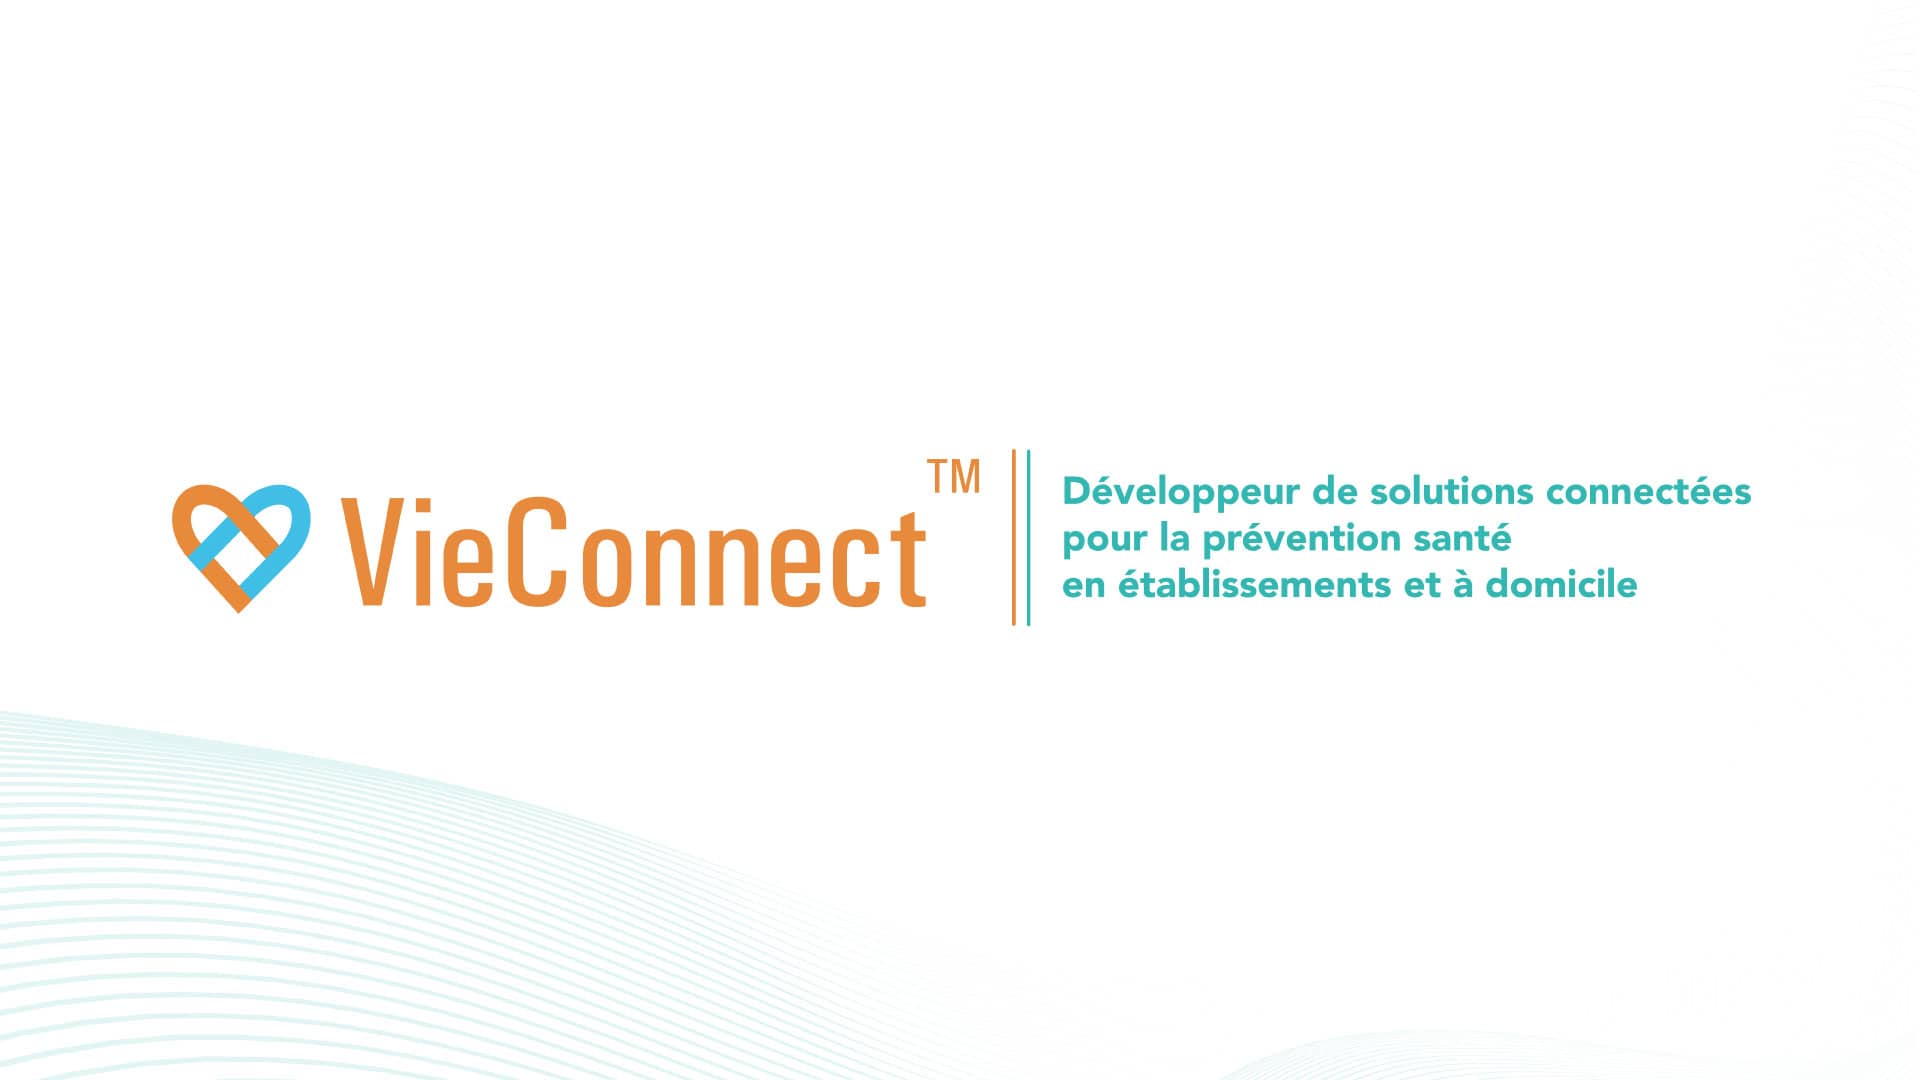 VieConnect-home-solutions-connectees-medicales